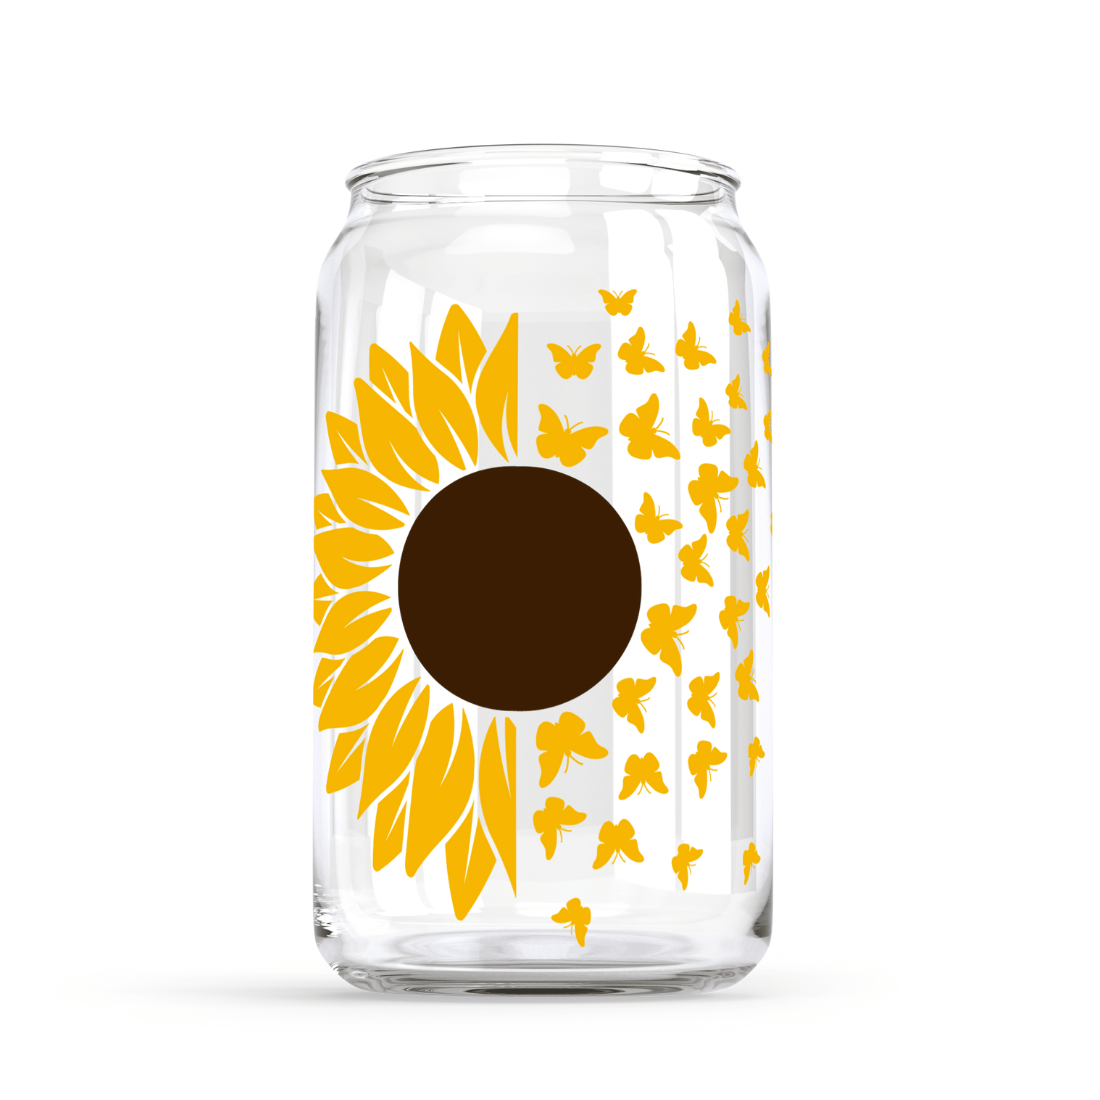 Glass jar with a sunflower and butterflies on it.